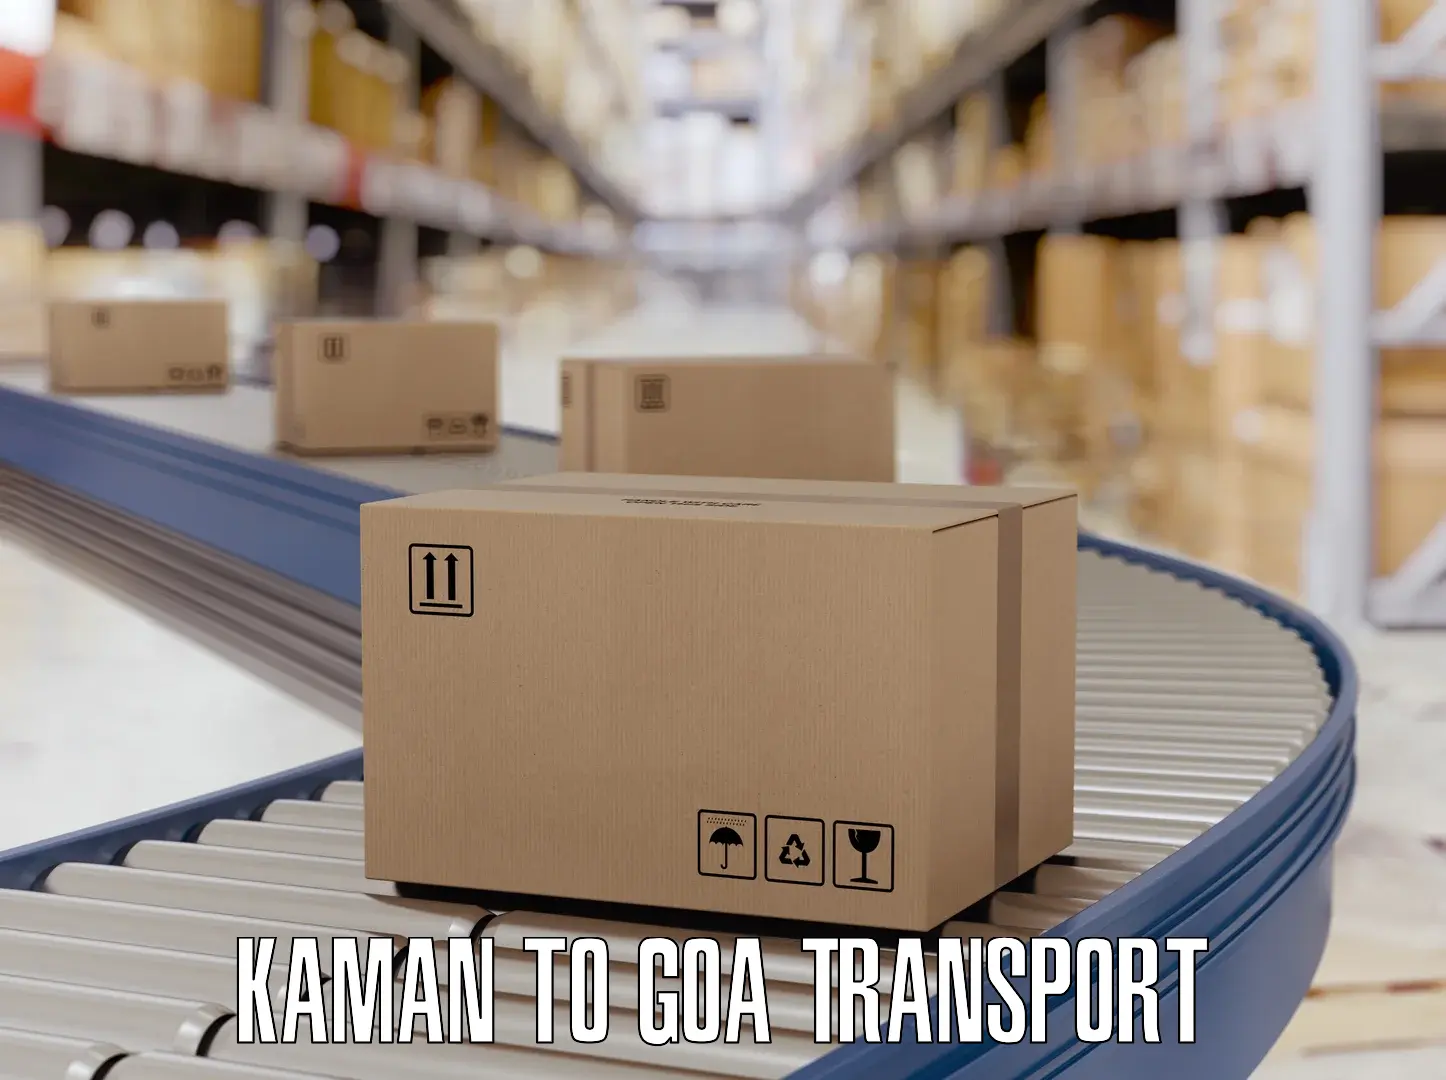 Daily transport service Kaman to South Goa